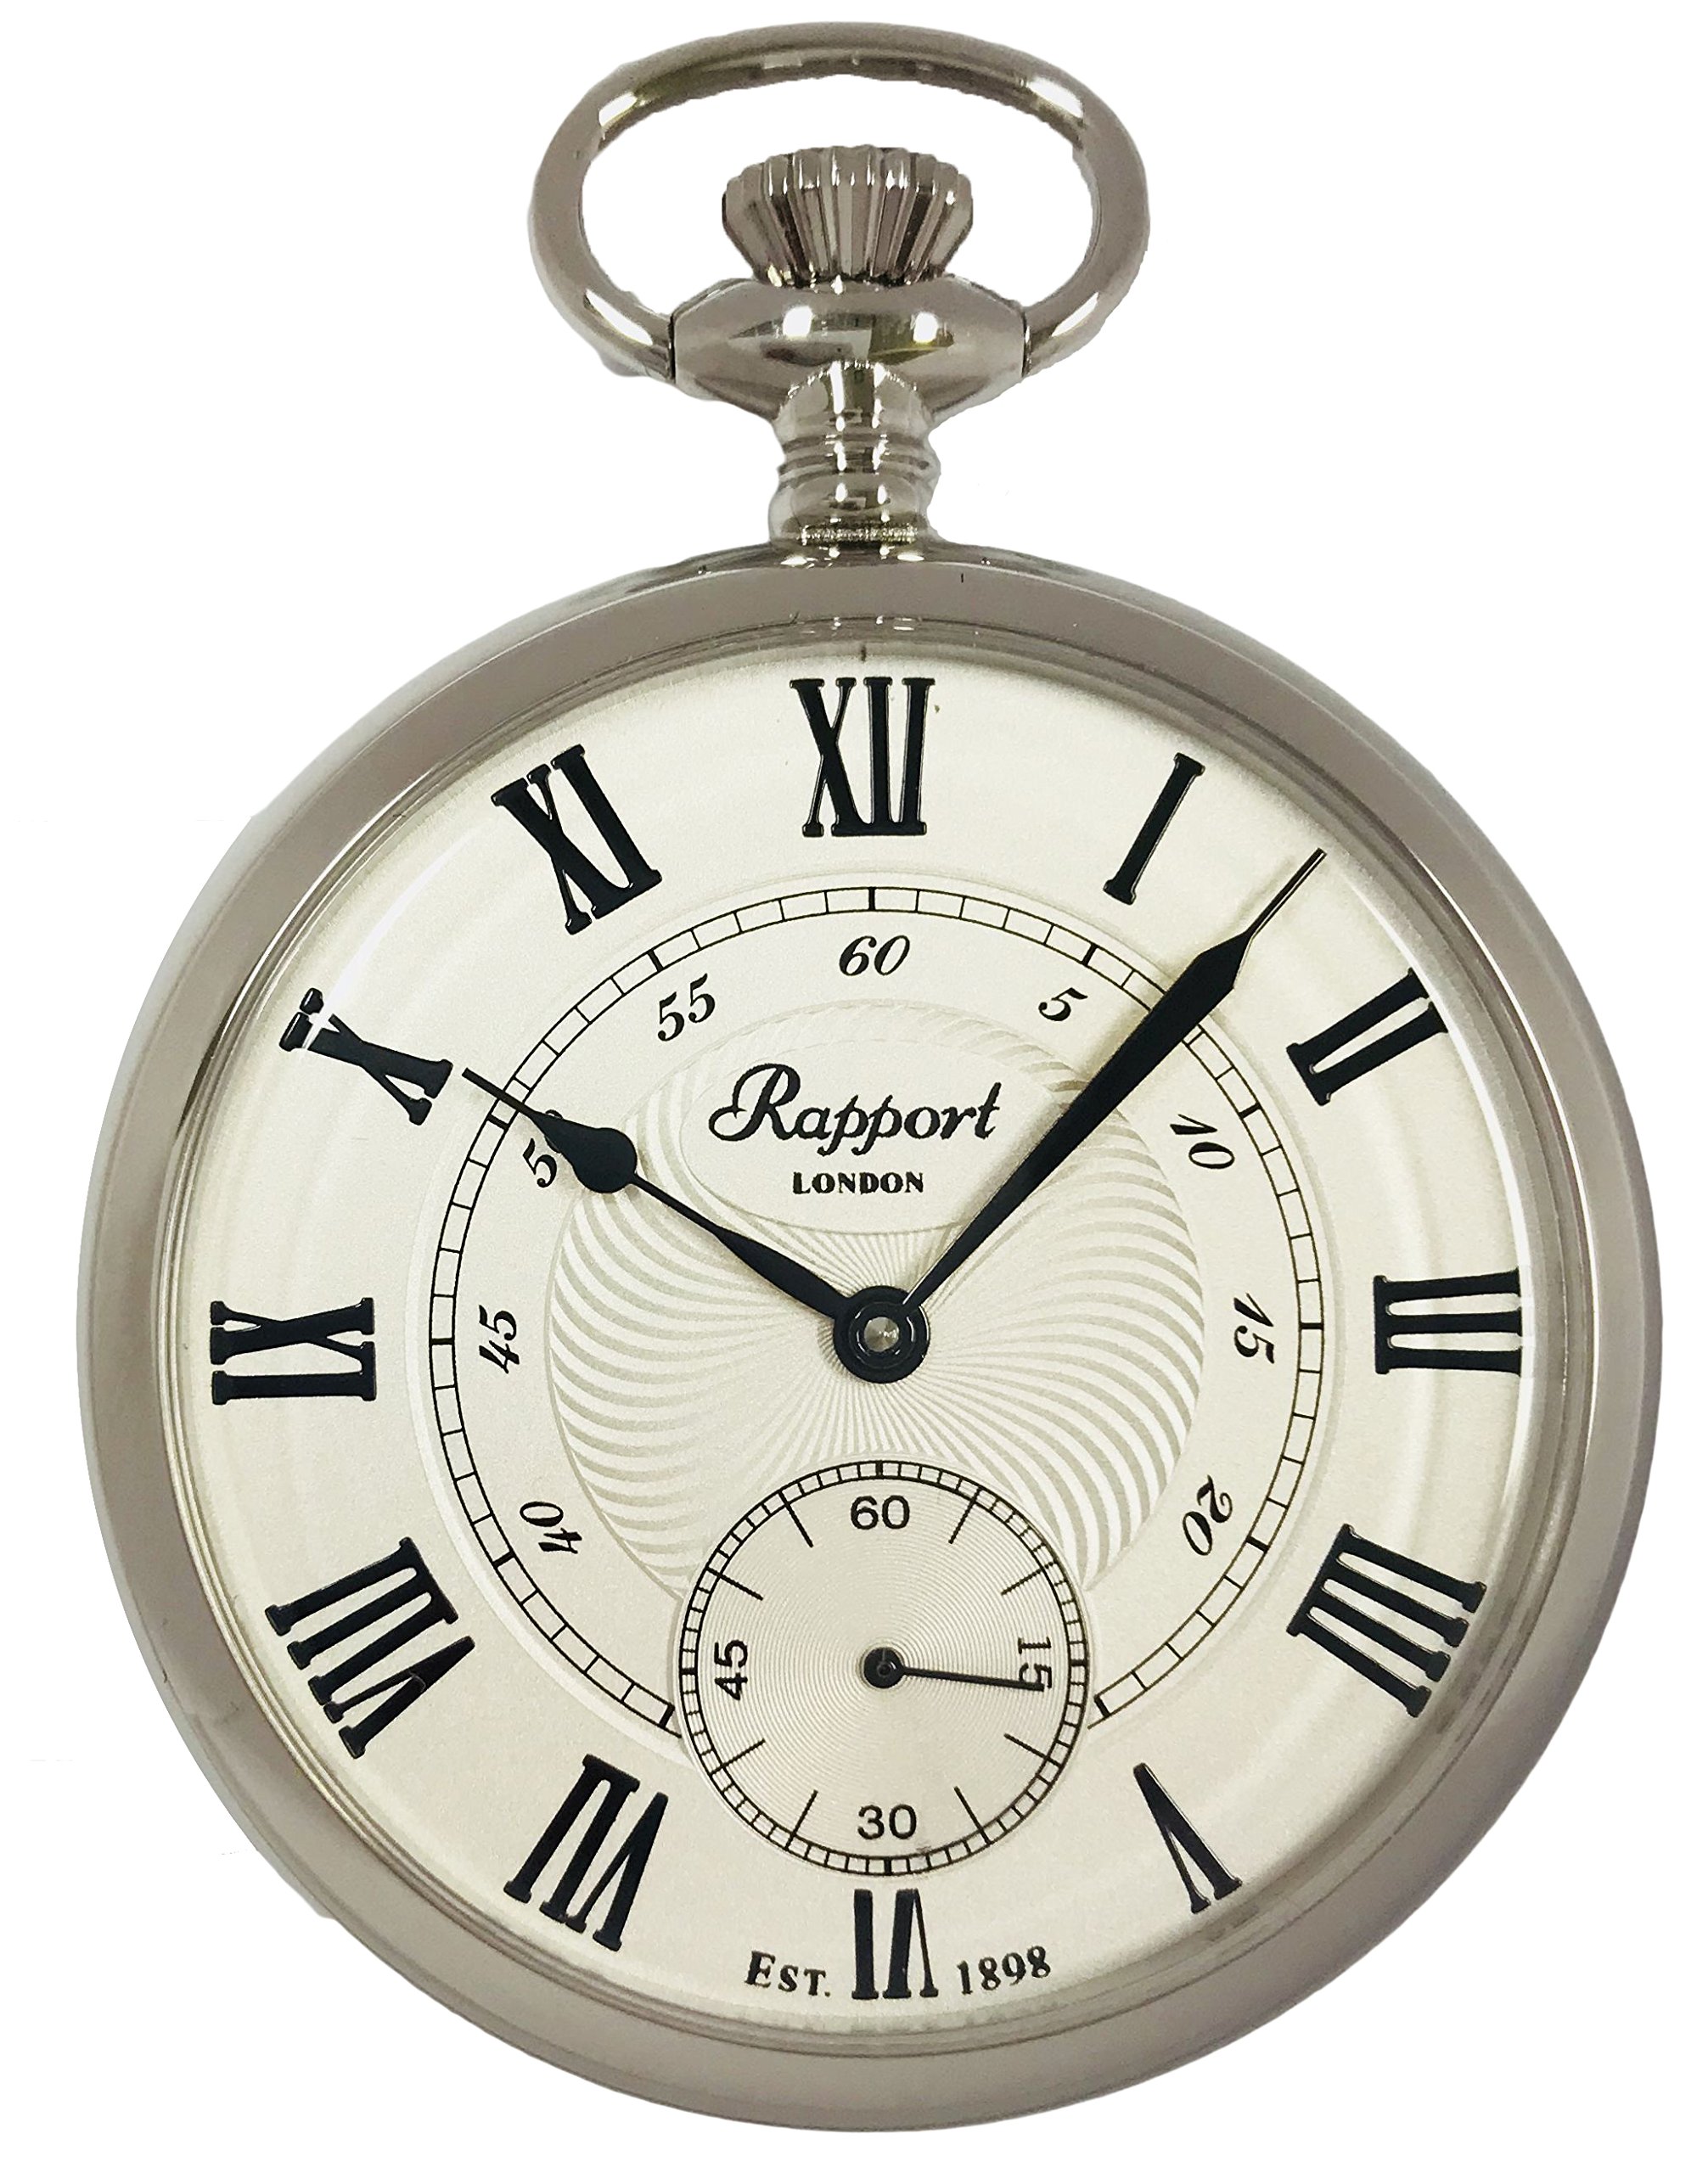 Rapport Vintage Pocket Watch with Chain Classic Oxford Open Face Pocket Watch with Sub-Seconds - Silver